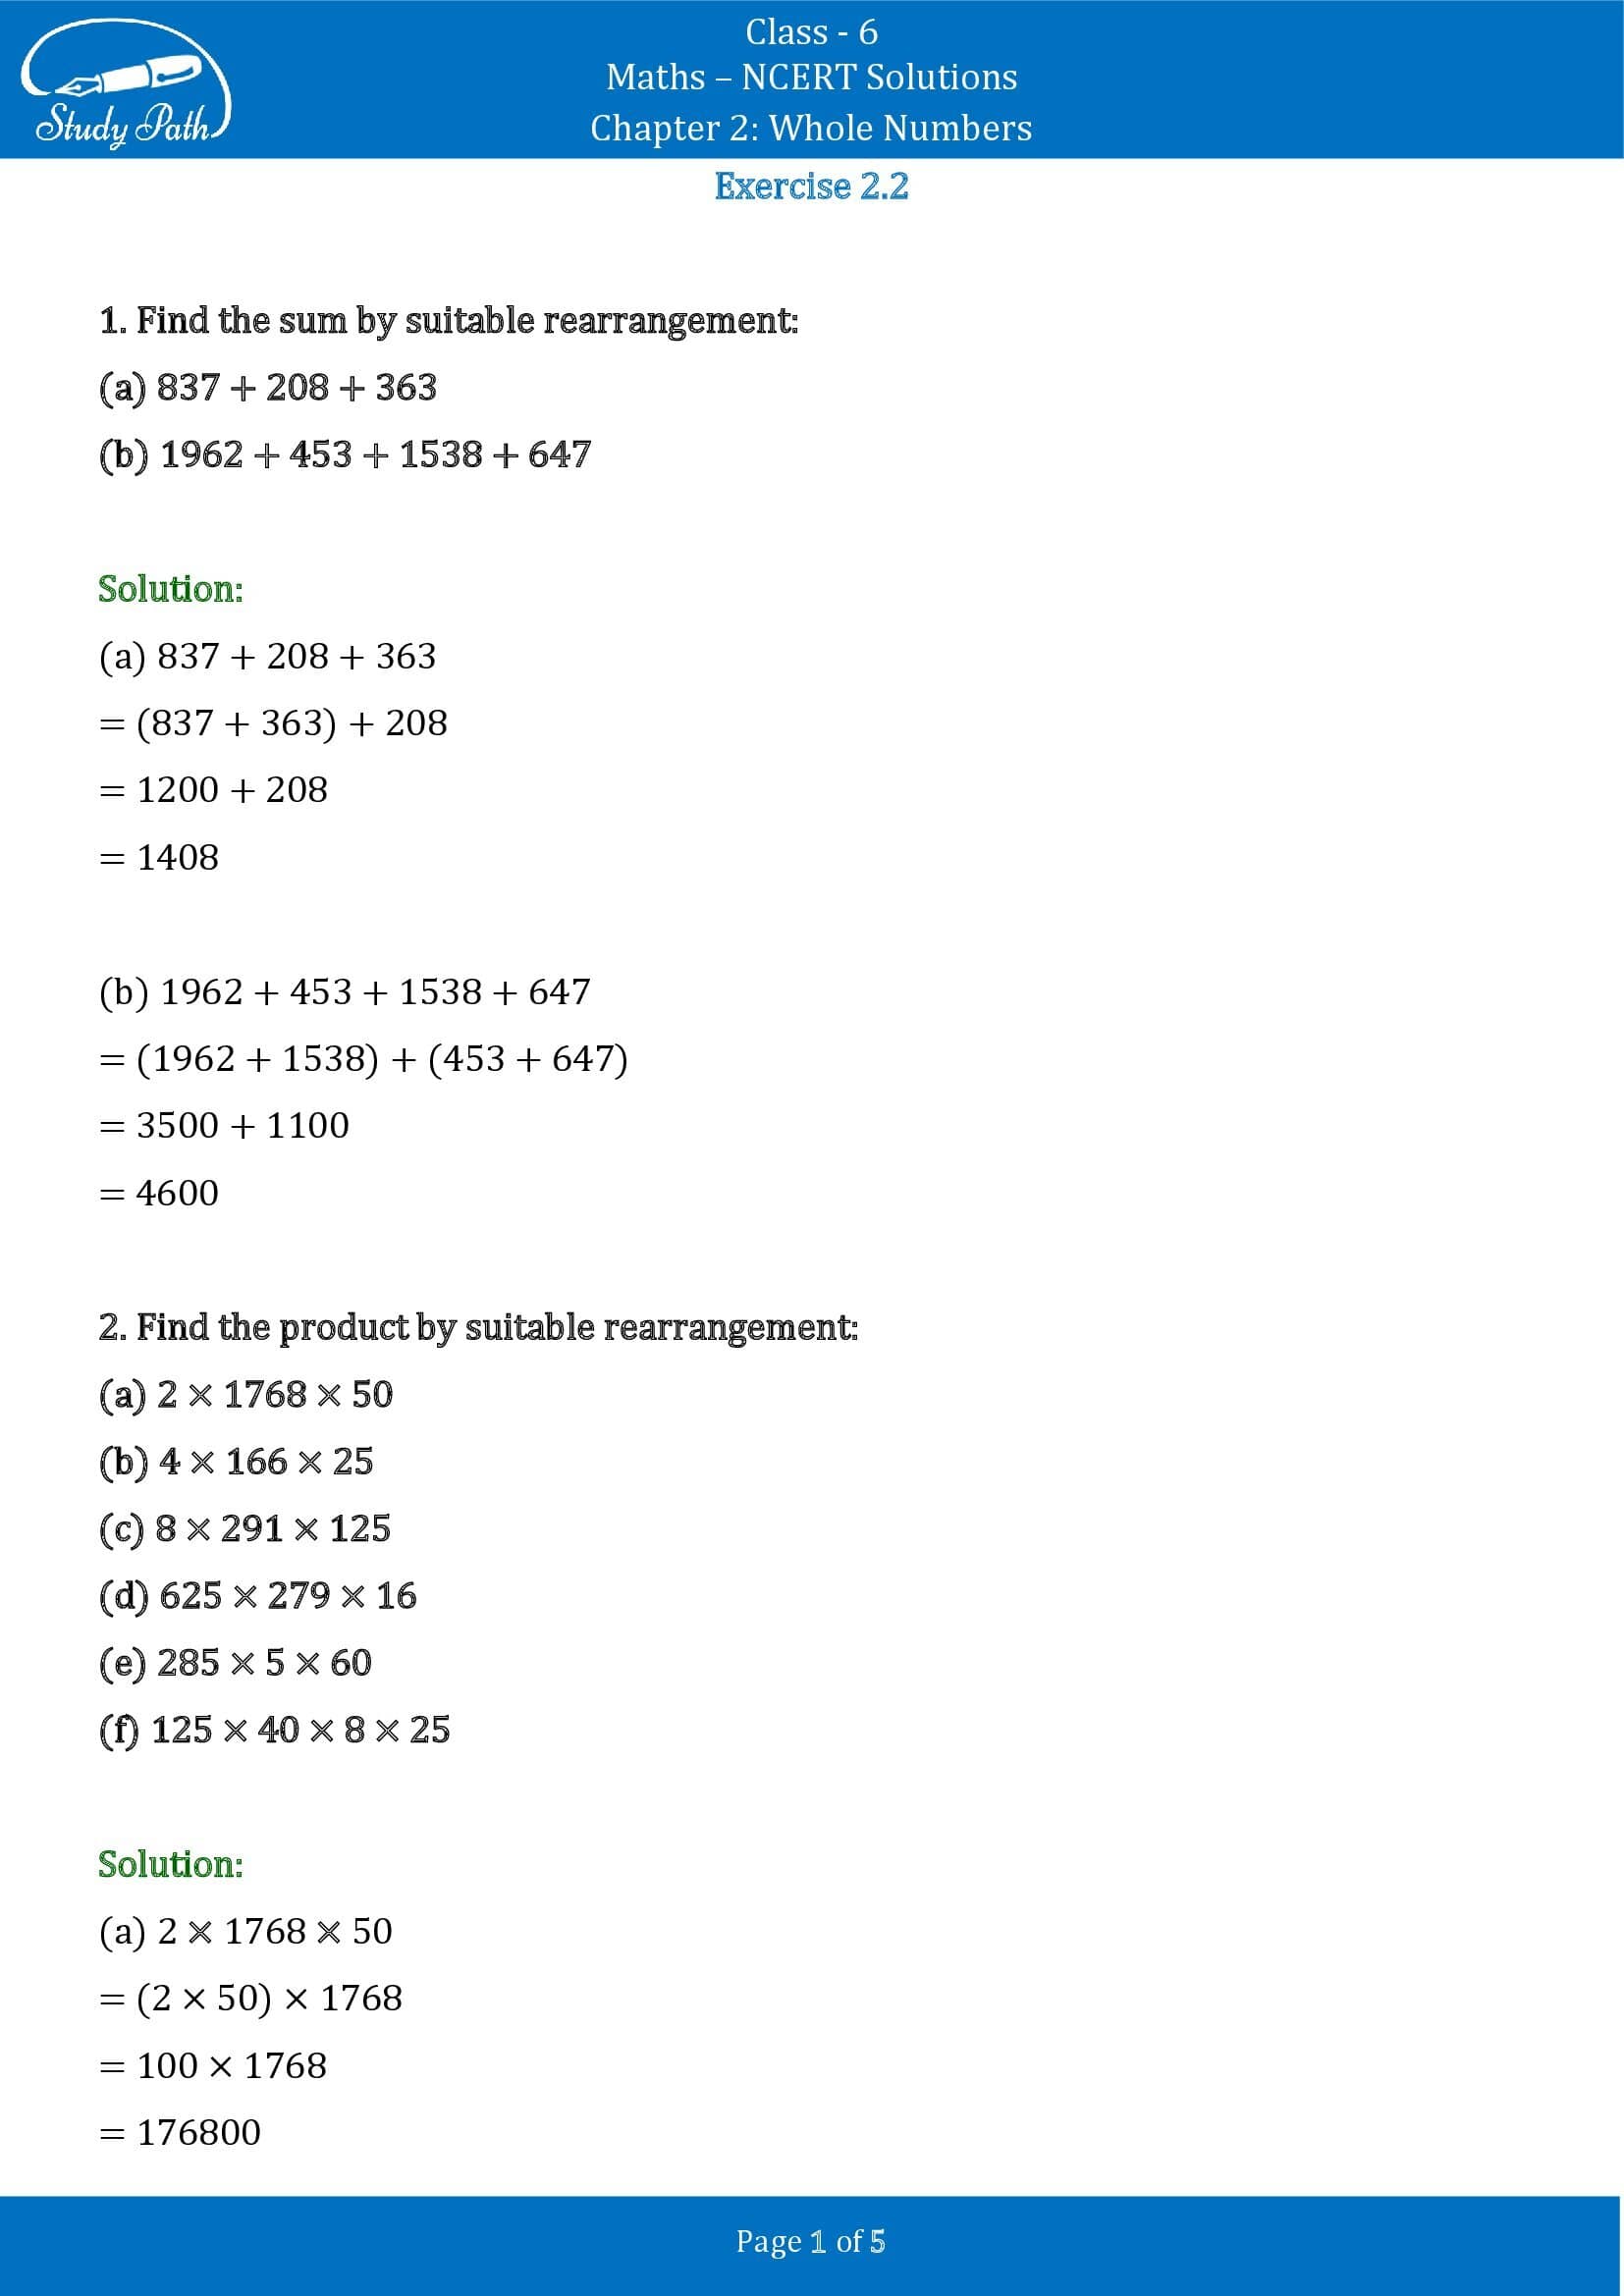 NCERT Solutions for Class 6 Maths Chapter 2 Whole Numbers Exercise 2.2 00001